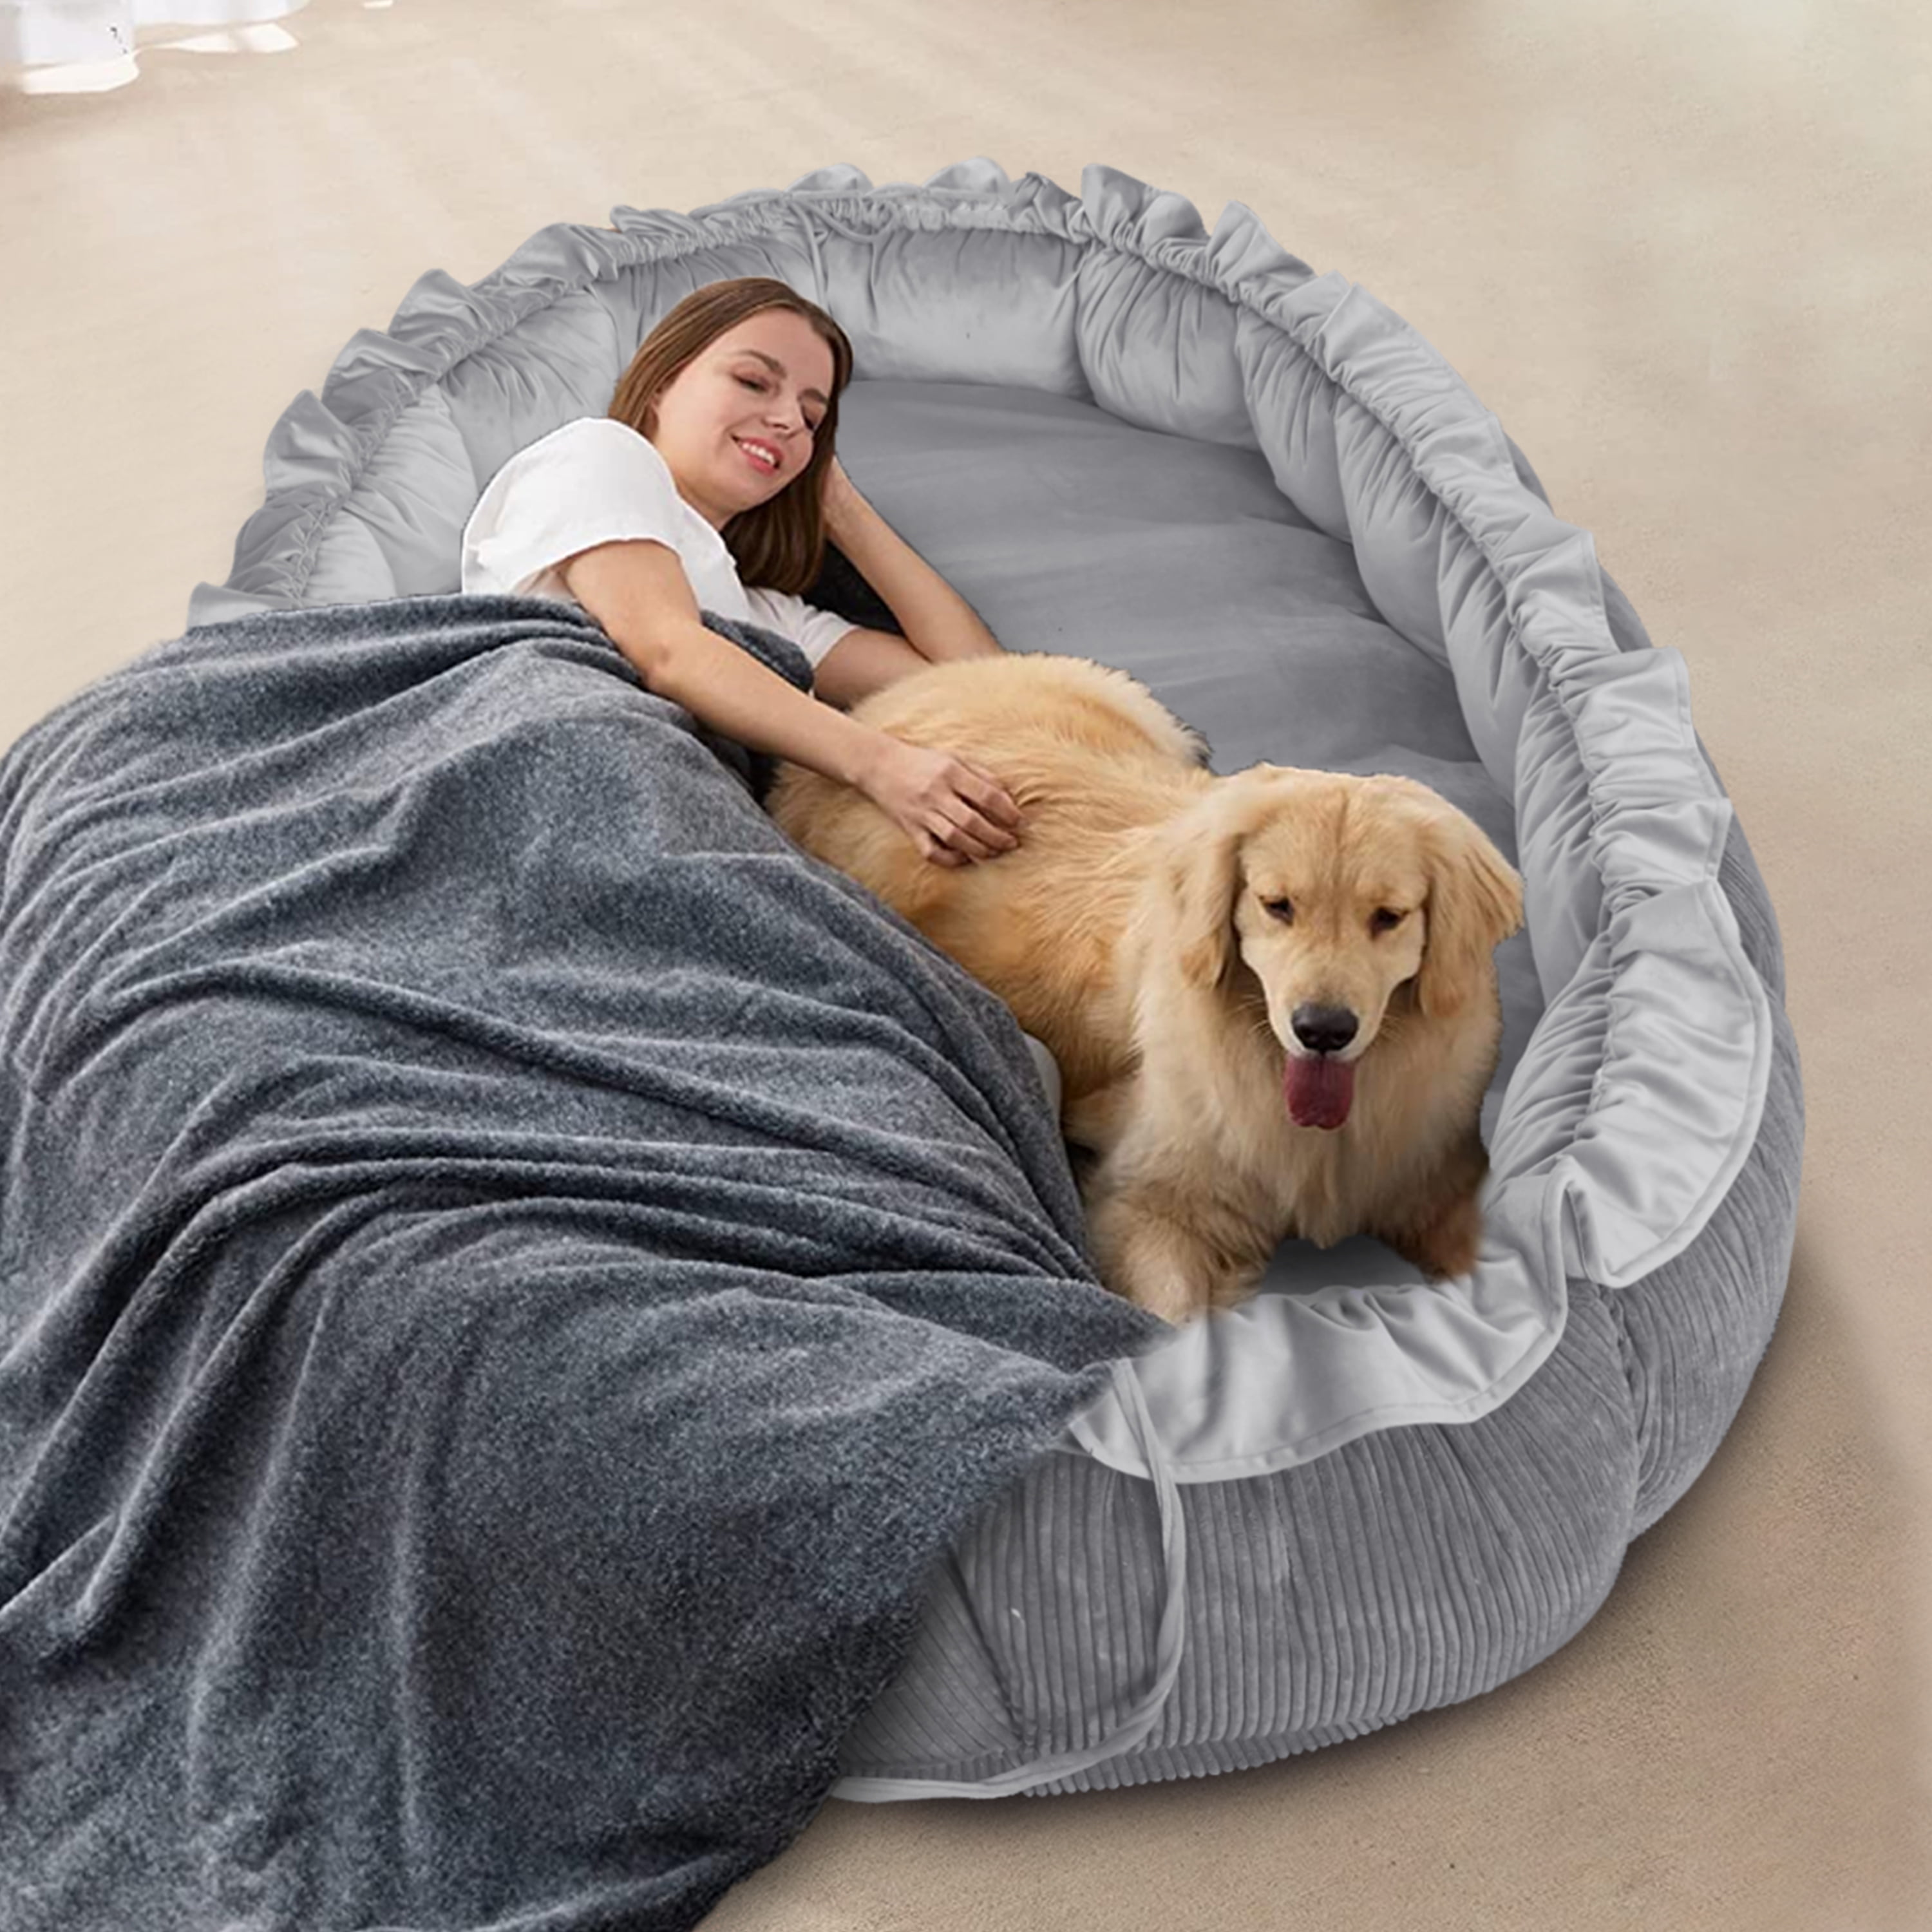 Rounuo Giant Human Dog Bed Very Safe Bean Bag Bed Large xxxl Dog Beds ...